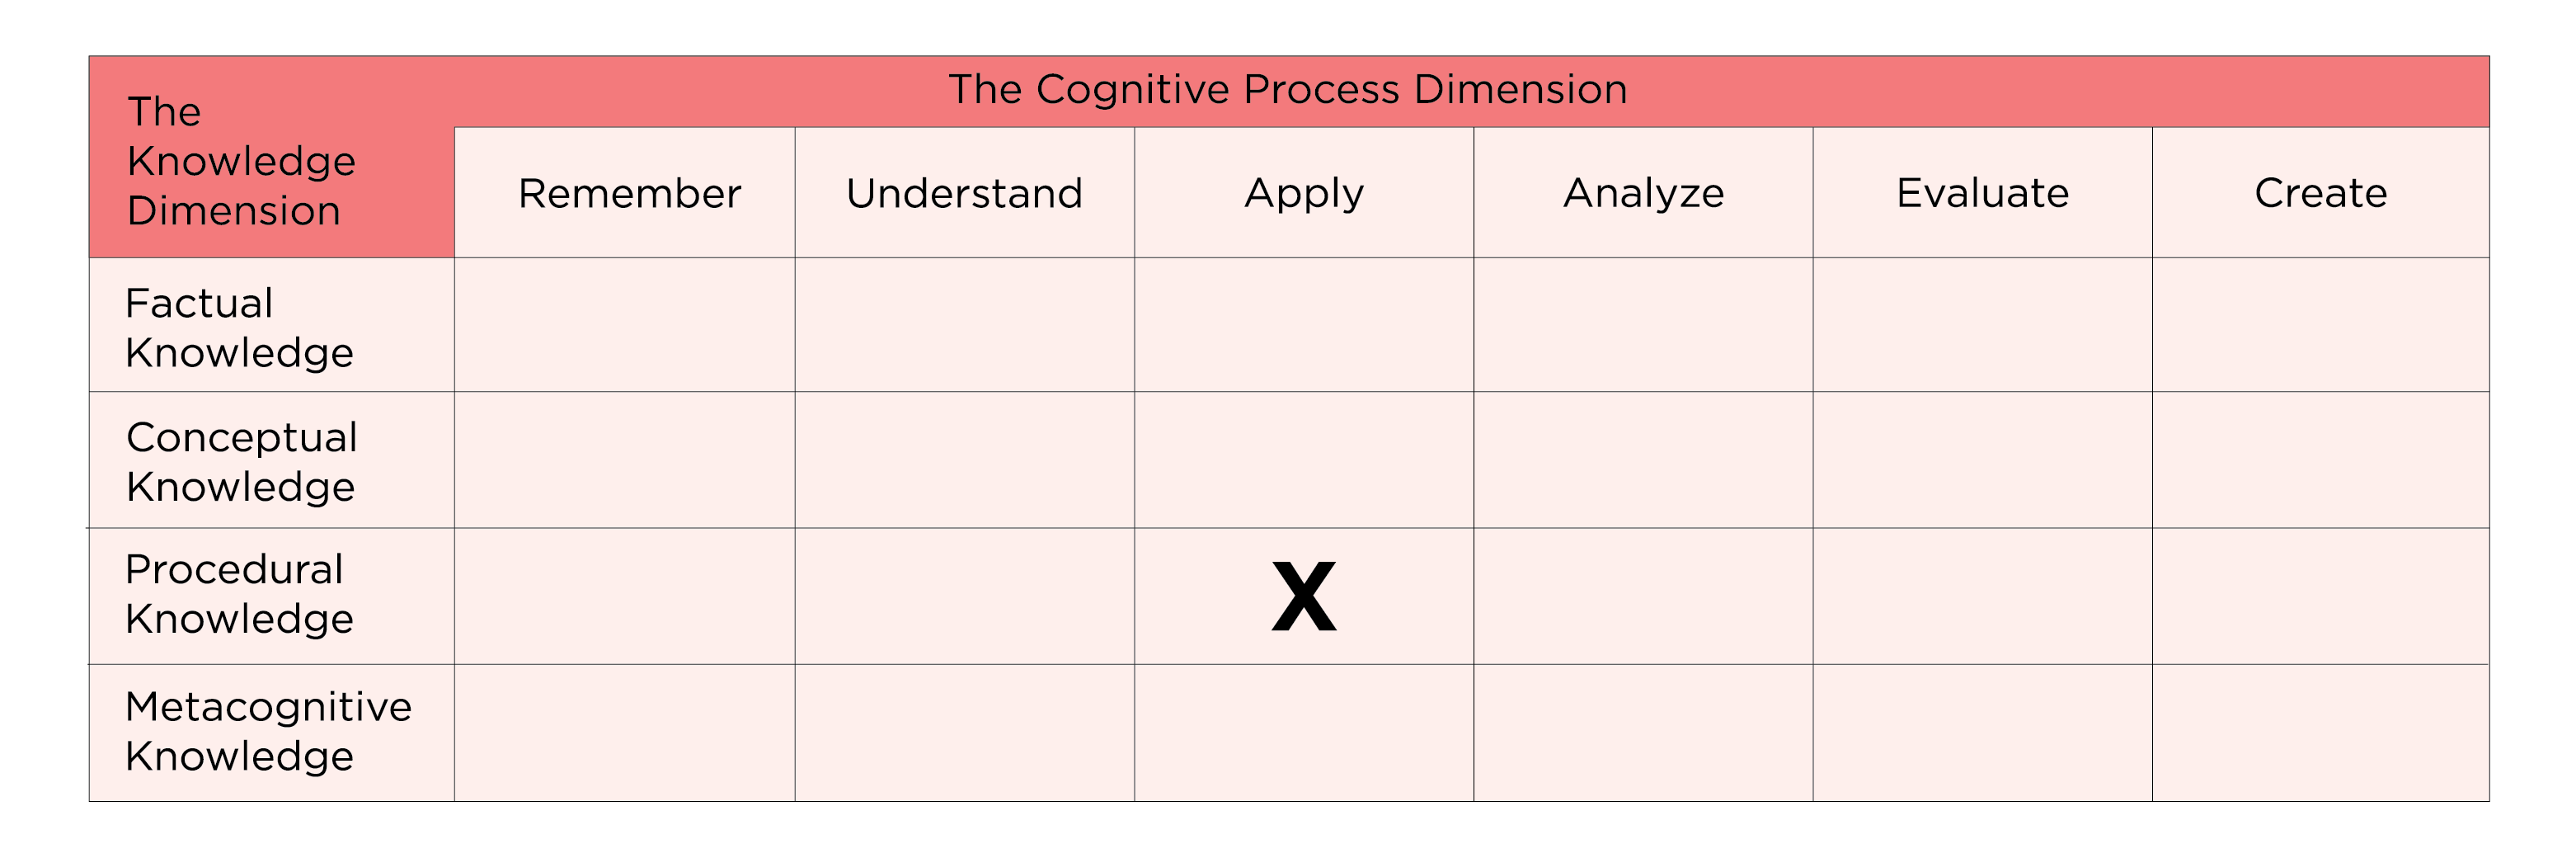 Anderson and Krathwohl's (2001) revised taxonomy has a two dimensions: the knowledge dimension, and the cognitive processes dimension